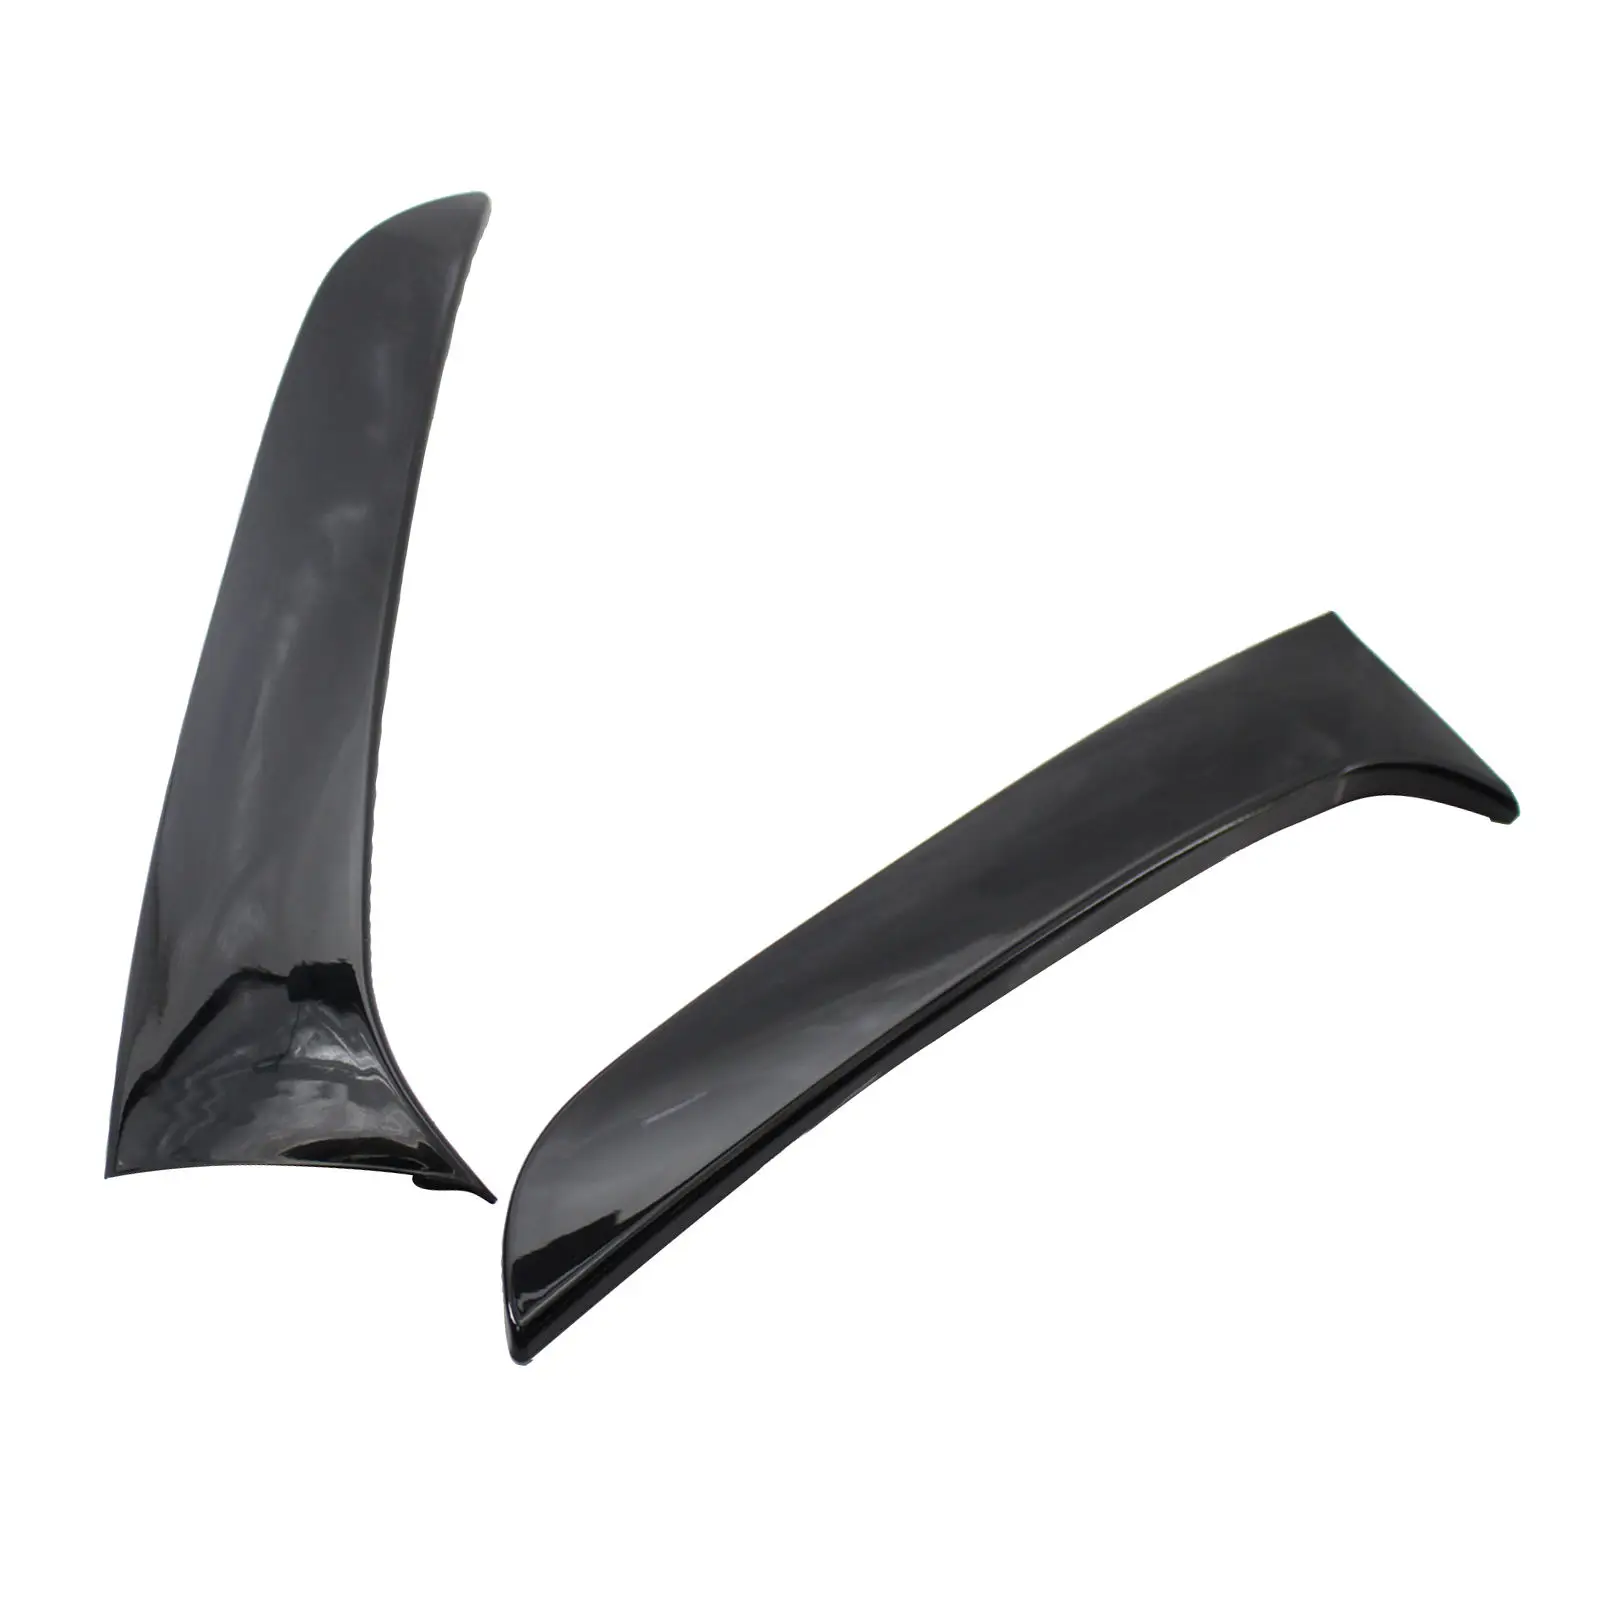 2Pcs Rear Window Side Spoiler Wing for BMW 1 Series F20 F21 Auto Accessories